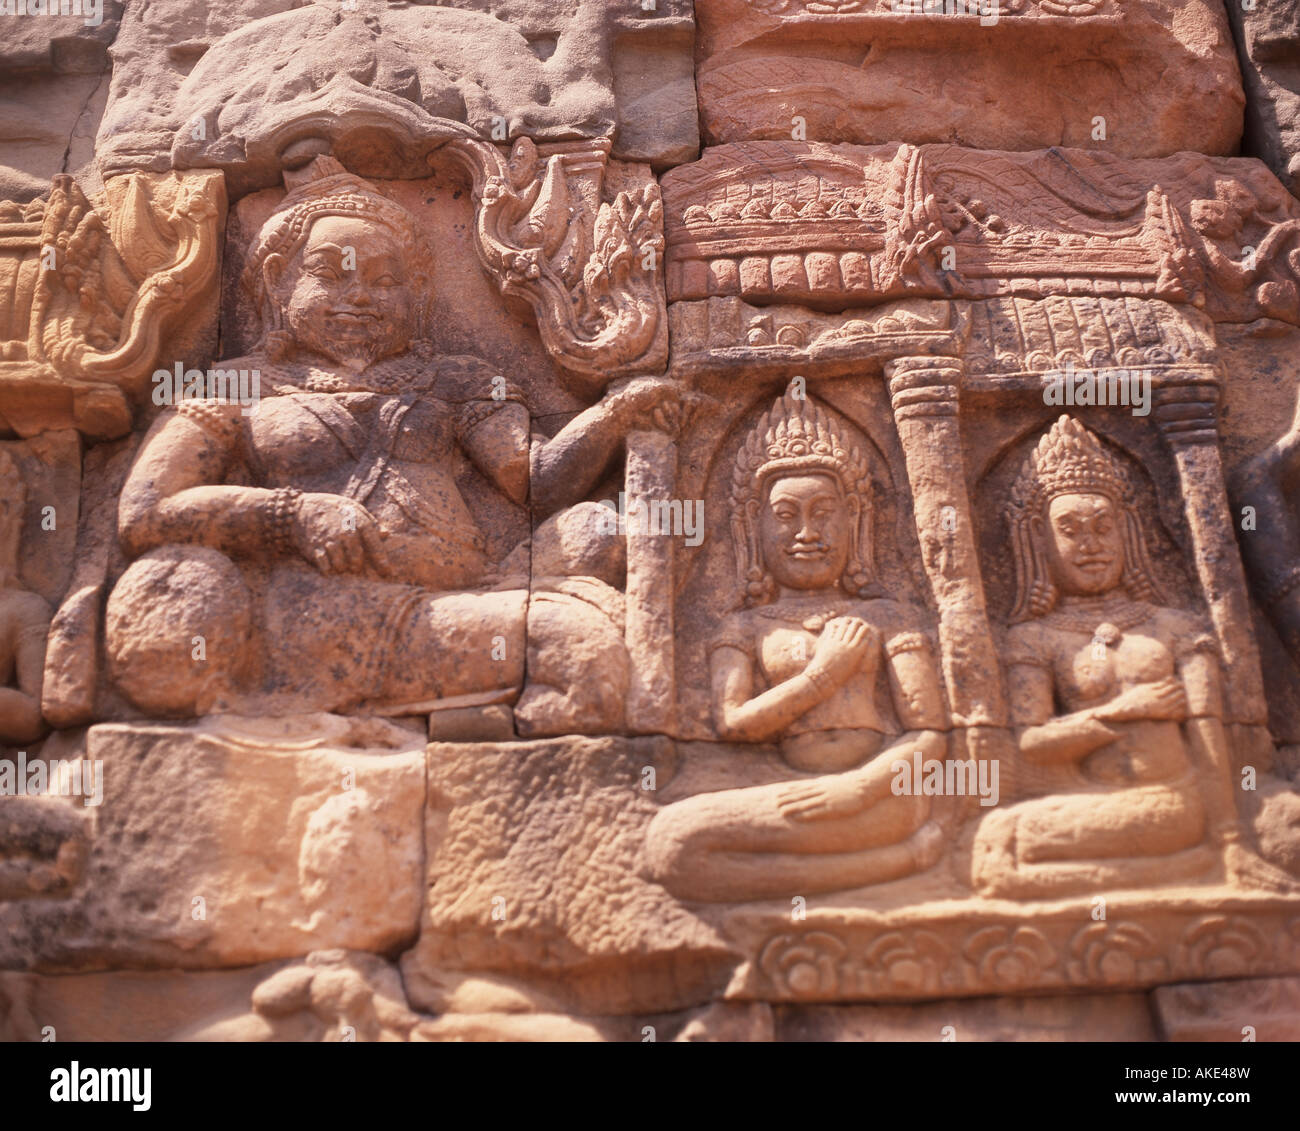 Ancient stone carvings, Terrace of the Leper King, Angkor Thom, Siem Reap, Cambodia Stock Photo